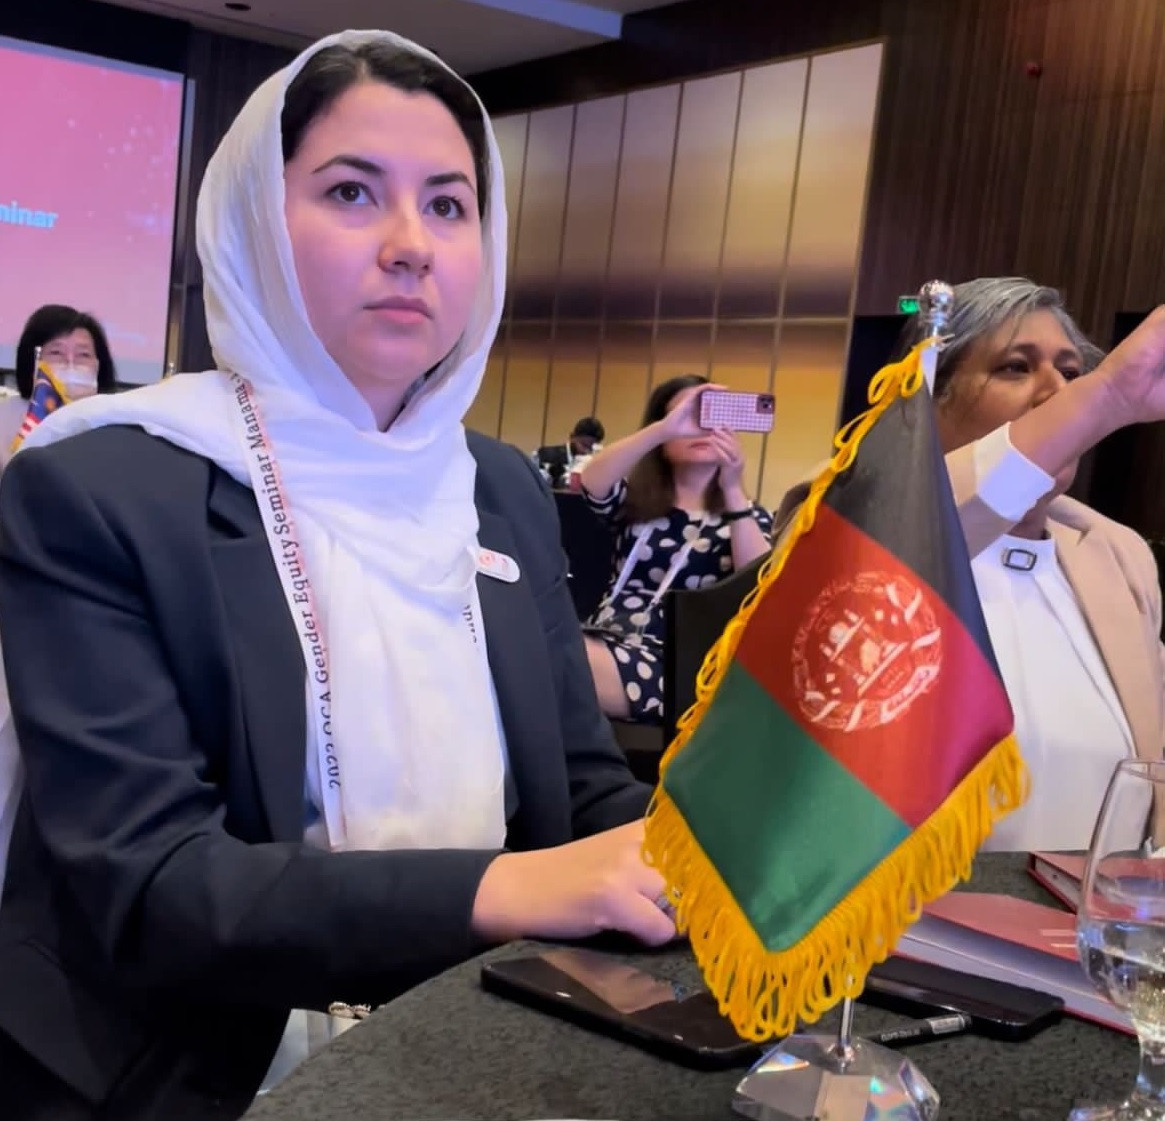 Exclusive: Afghan IOC member says country like a "prison" for women but hopeful of progress